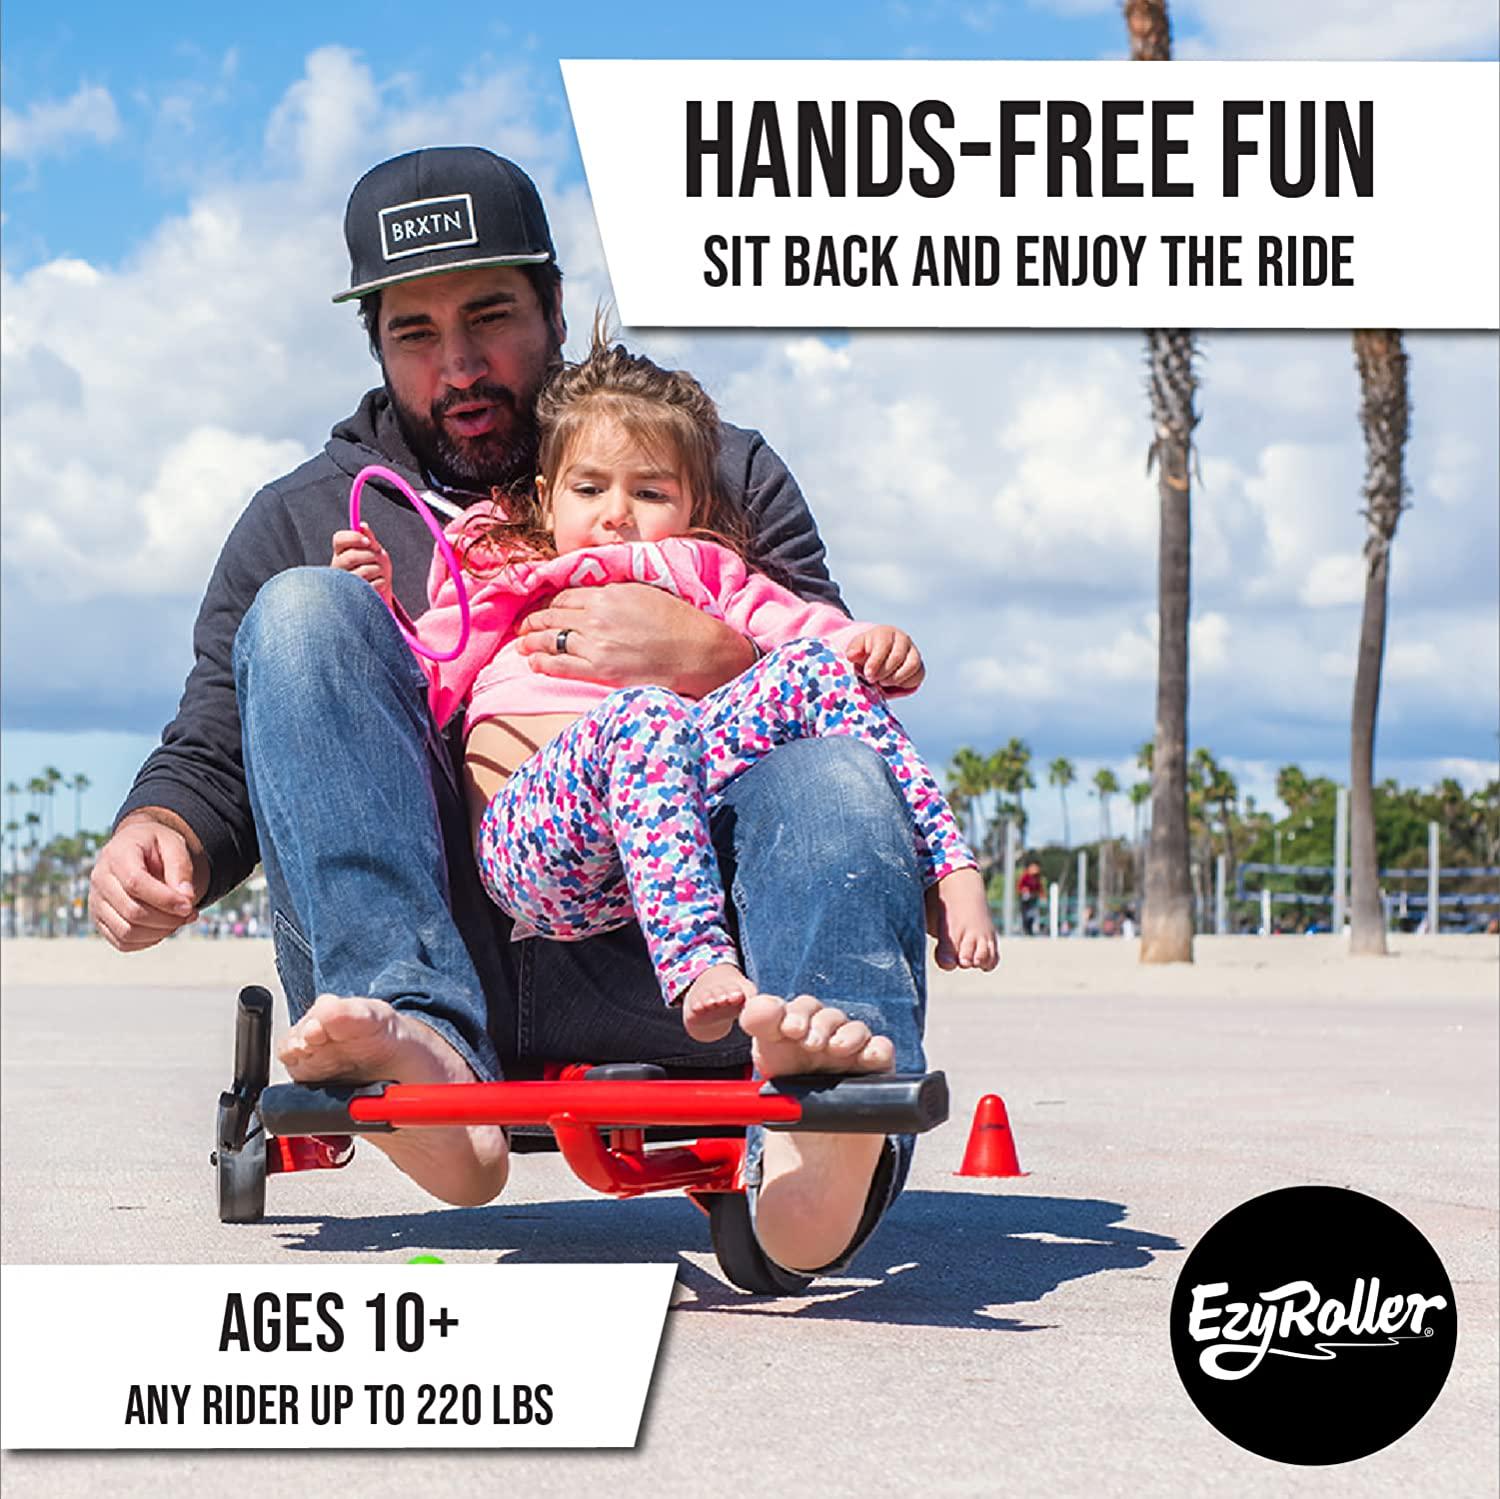 EzyRoller, EzyRoller New Drifter Pro-X Ride on Toy for Kids or Adults, Ages 10 and Older Up to 200 lbs.